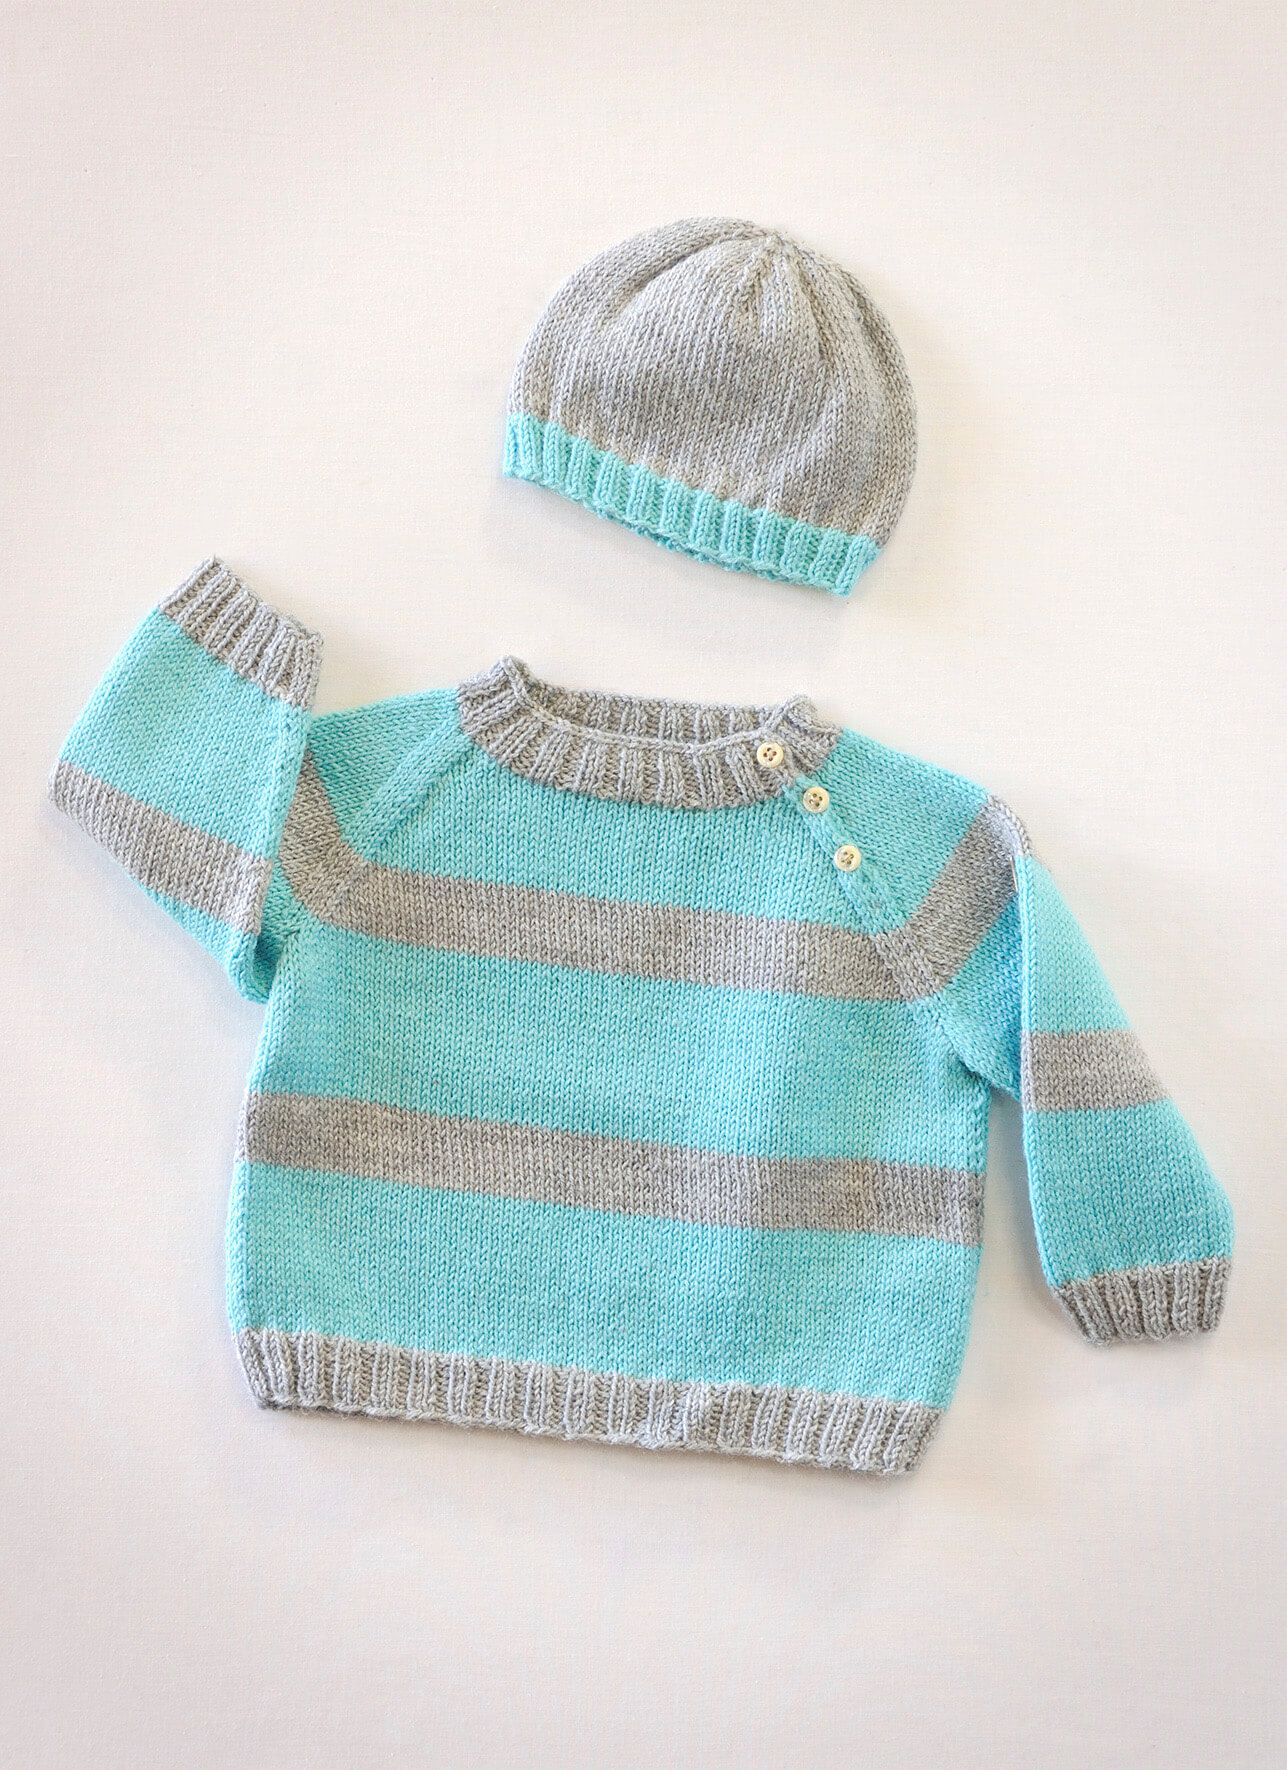 baby sweater and hat knitting pattern